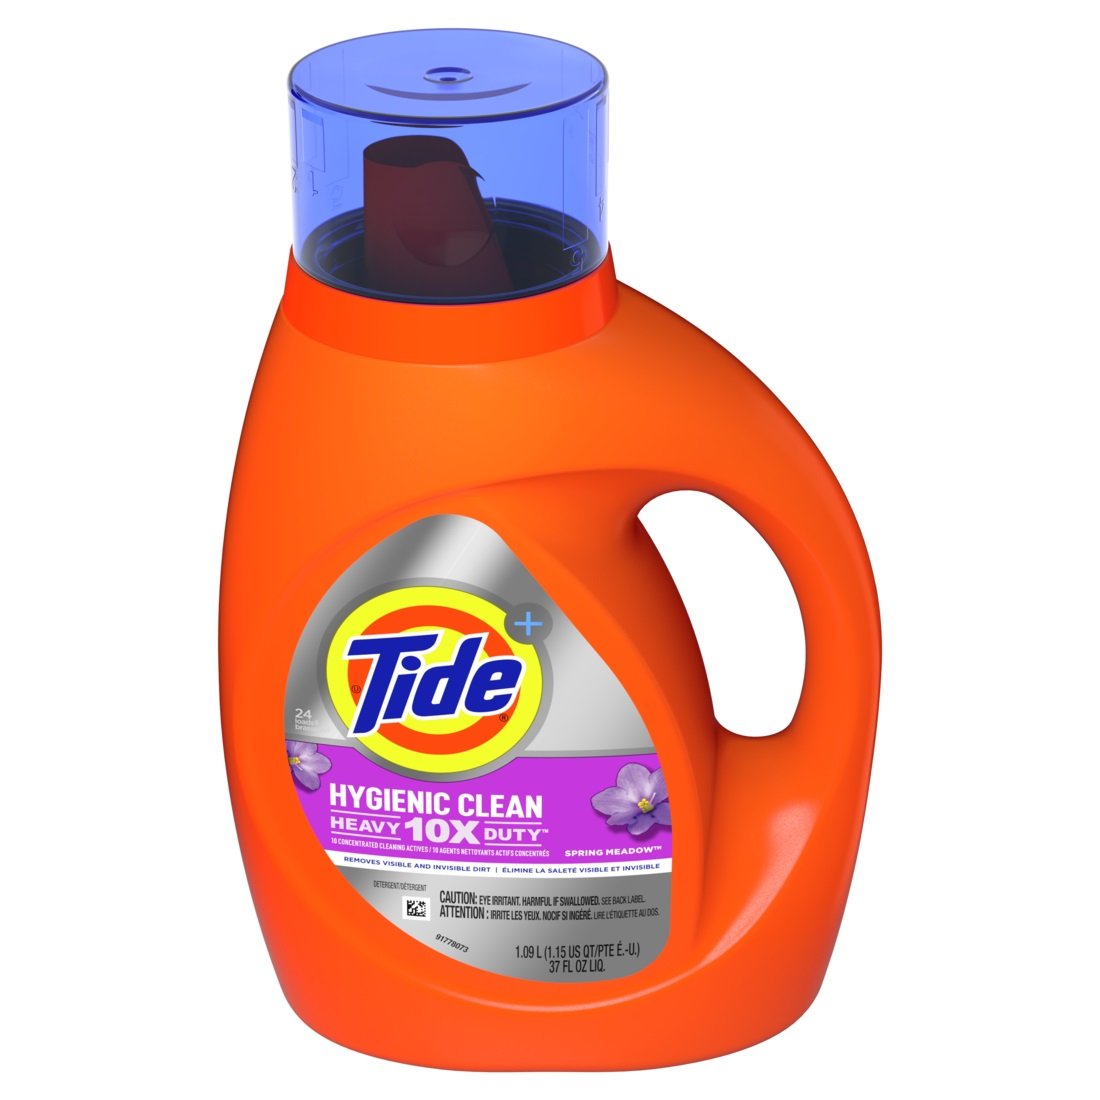 Tide - Hygienic Clean Heavy 10x Duty HE Compatible Liquid Laundry Detergent 37oz, Spring Meadow - Case of 6